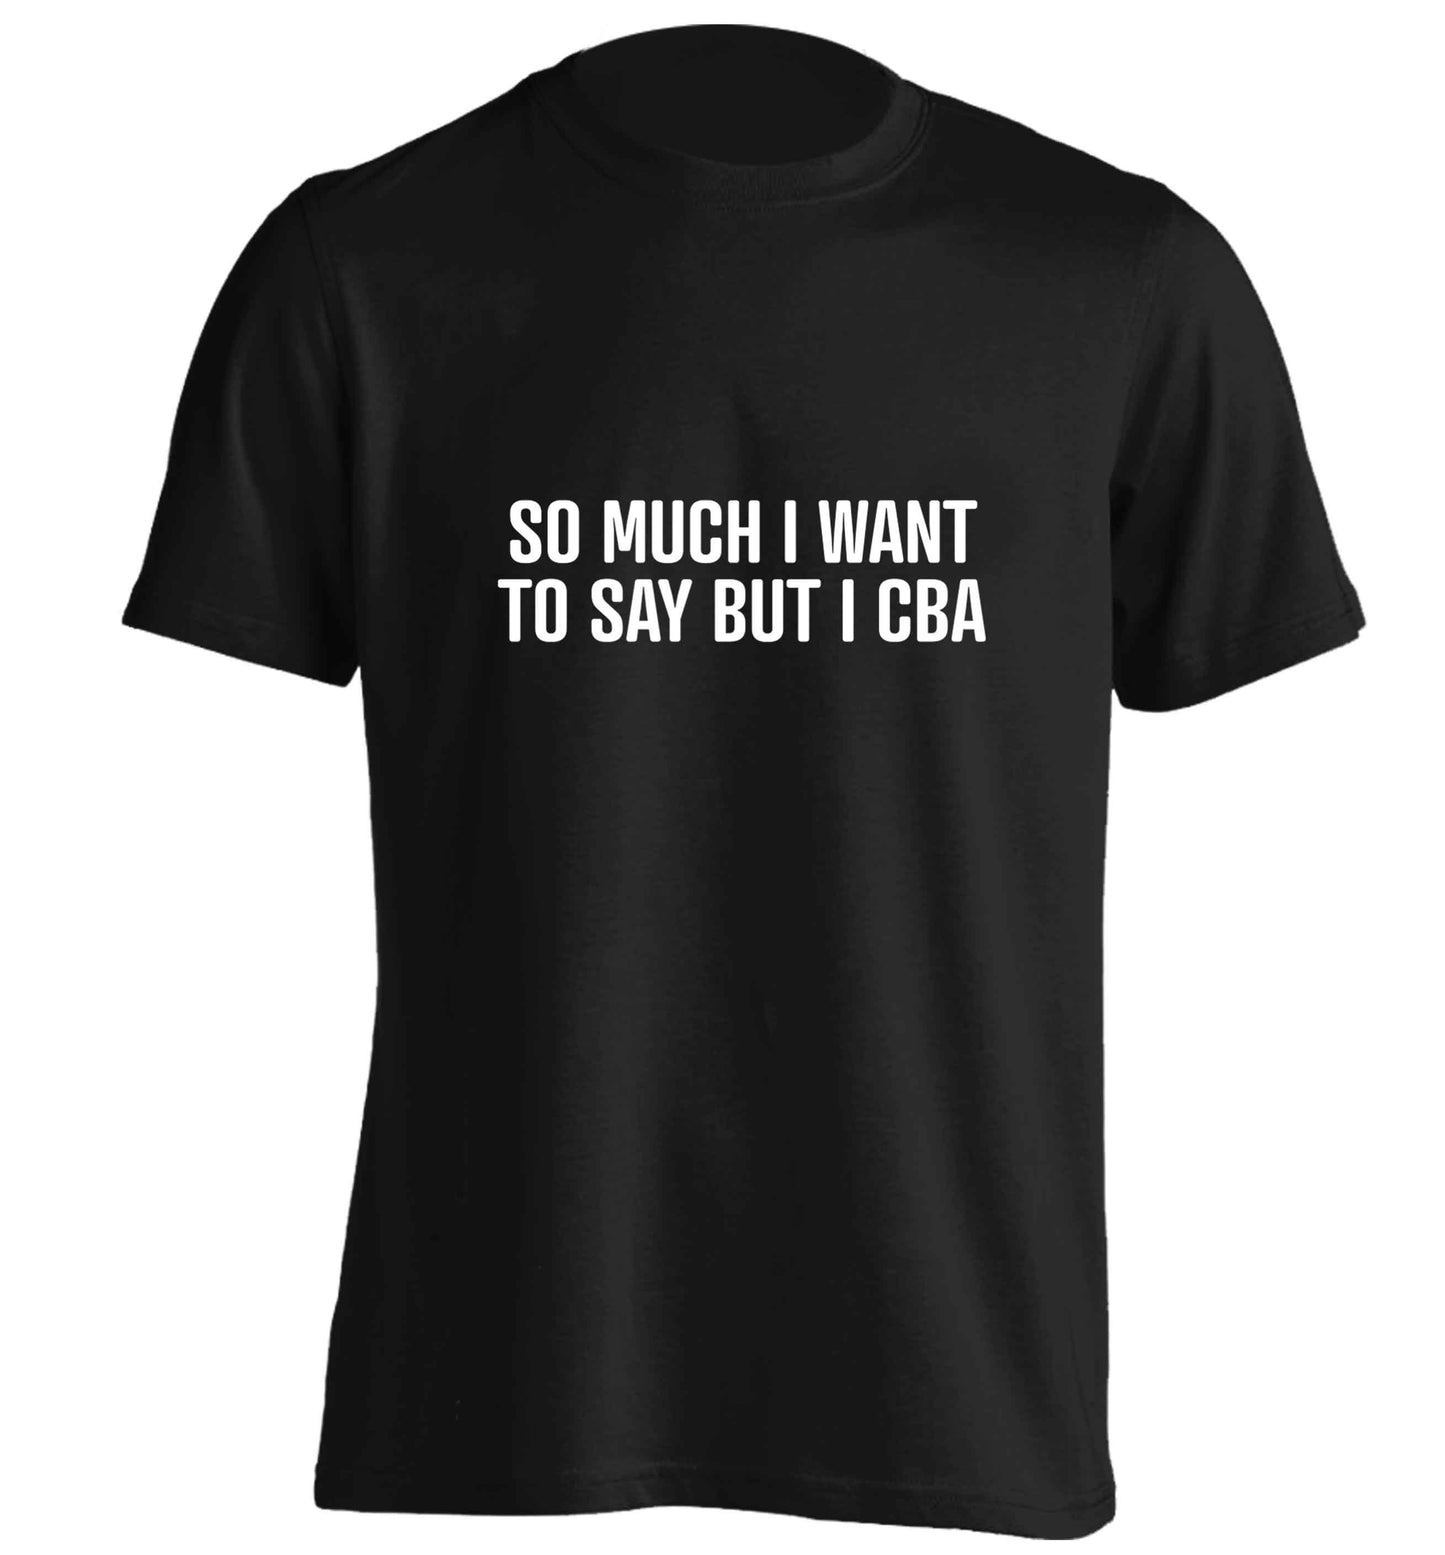 So much I want to say I cba  adults unisex black Tshirt 2XL